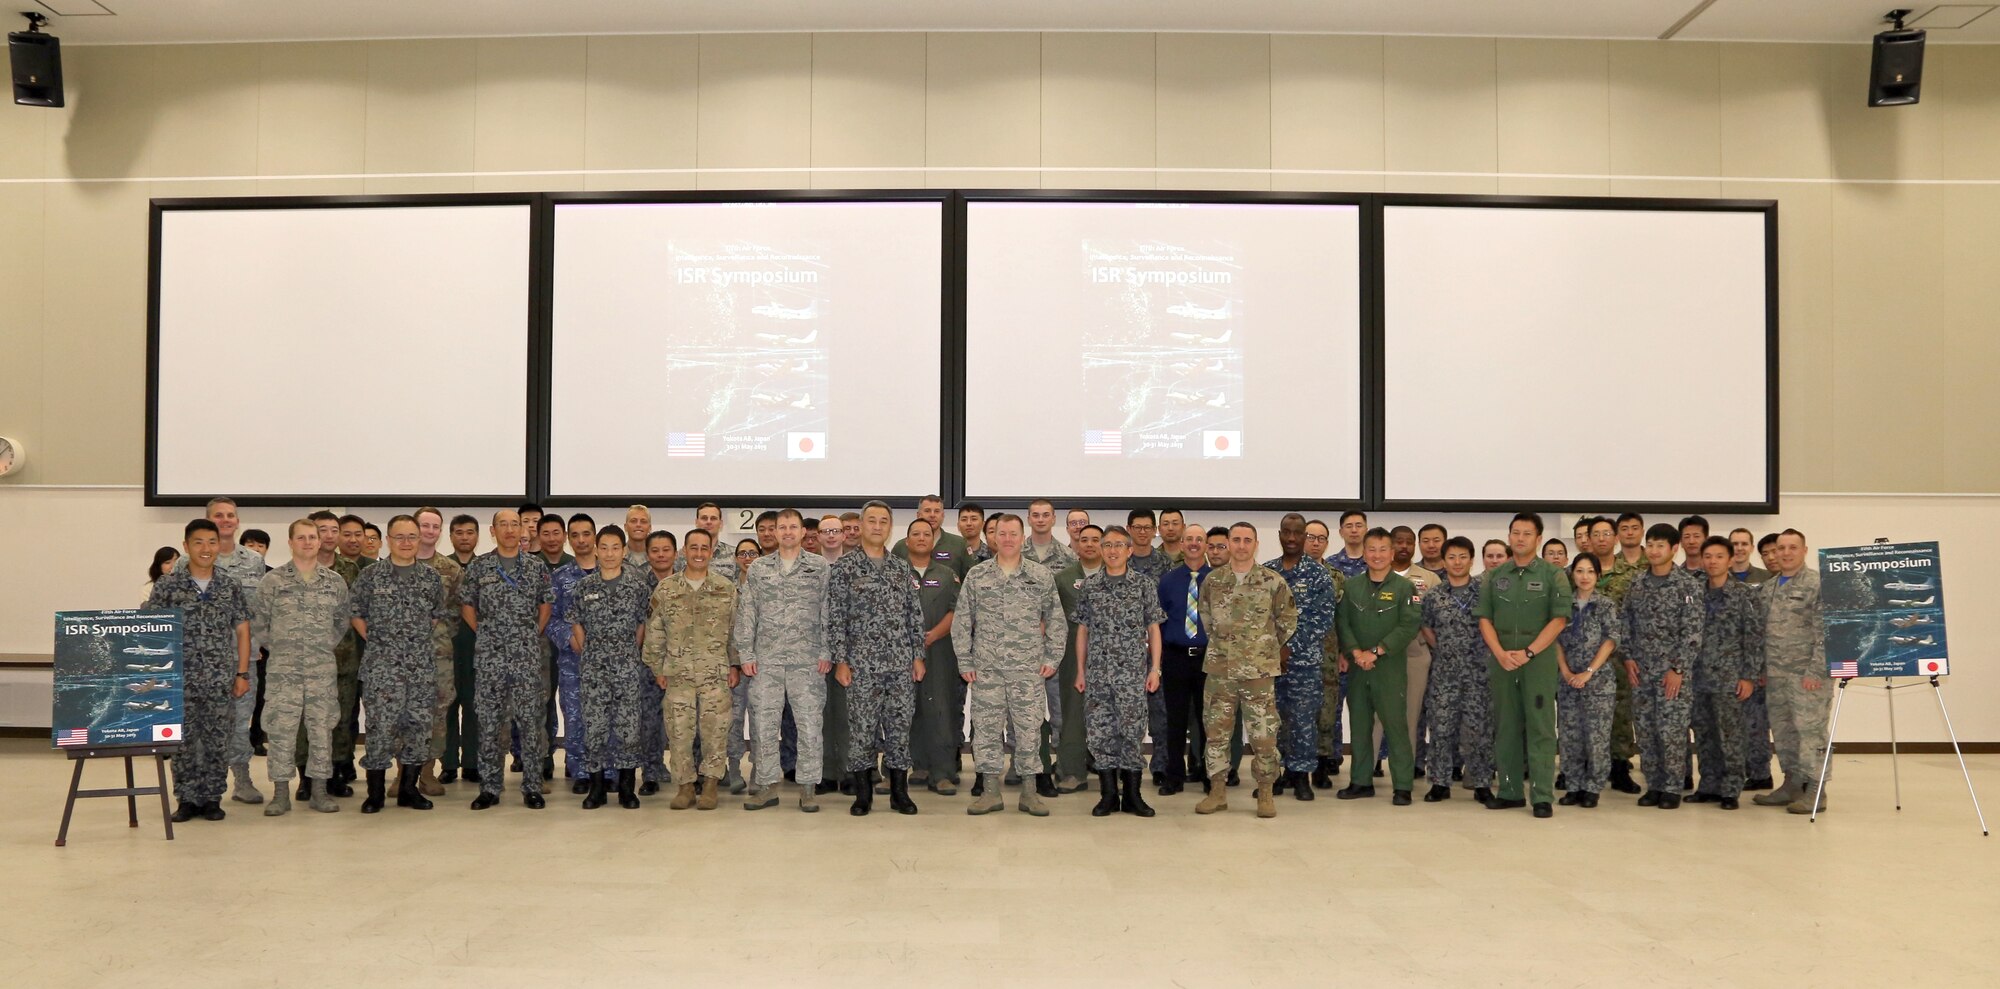 Intelligence, Surveillance and Reconnaissance personnel from 22 organizations across the Indo-Pacific theater including U.S. Air Force, U.S. Navy, and Japan’s Air, Maritime, and Ground Self-Defense Forces attended the inaugural Fifth Air Force joint, bilateral ISR symposium, Yokota Air Base, May 30-31, 2019. In an effort to meet the symposium objectives, the participants outlined key information sharing processes and conducted a table-top exercise to determine areas for increased cooperation, ultimately identifying solutions to pursue in future, joint ISR collaboration.